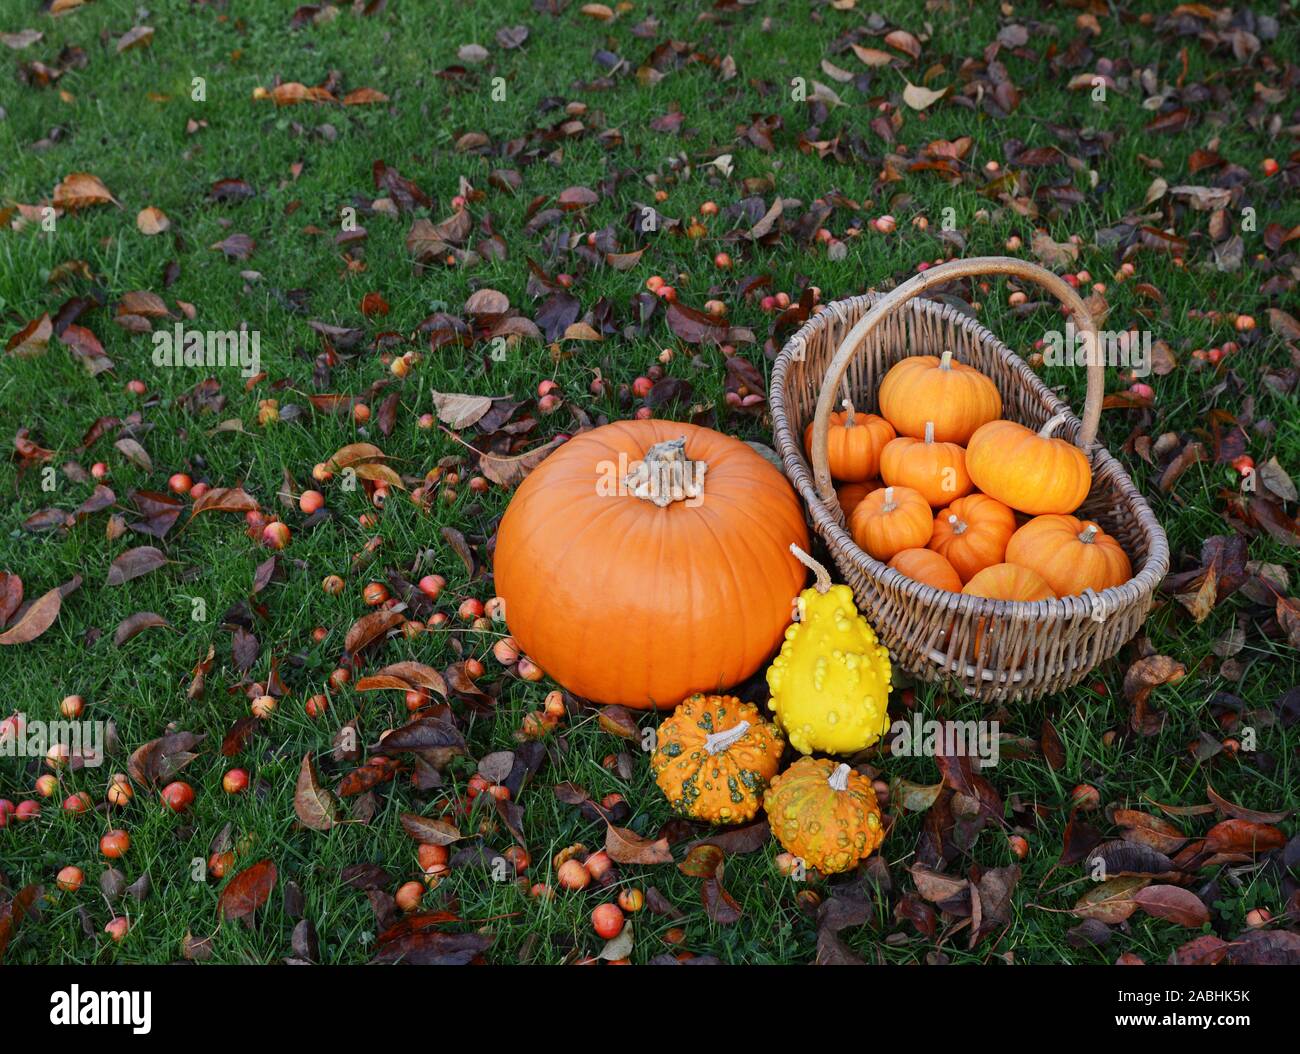 Large pumpkin and selection of ornamental gourds with a basket full of little orange pumpkins in an autumnal garden Stock Photo